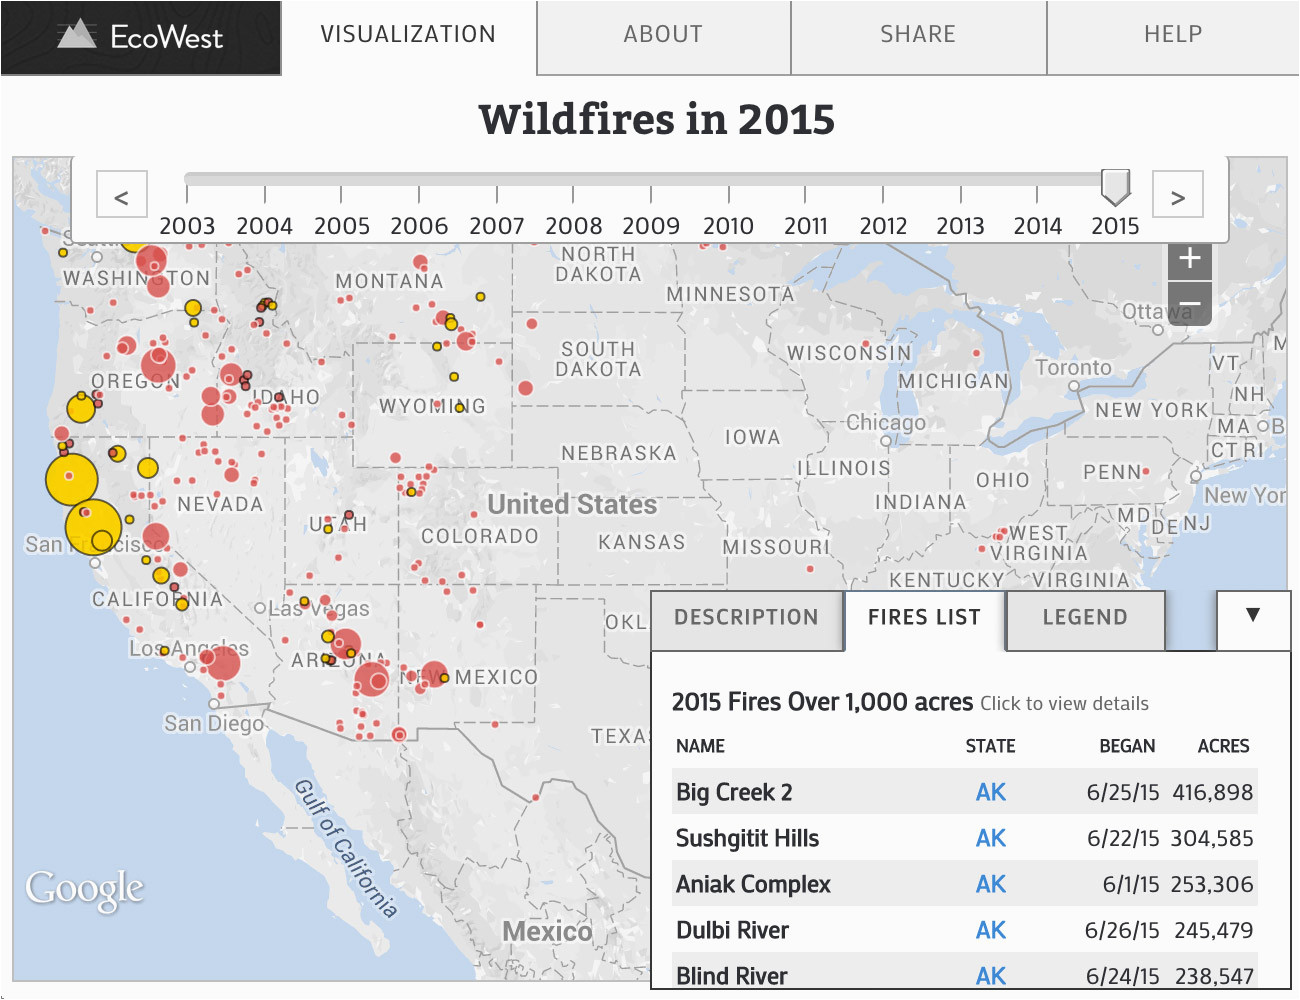 wildfires in the united states data visualization by ecowest org